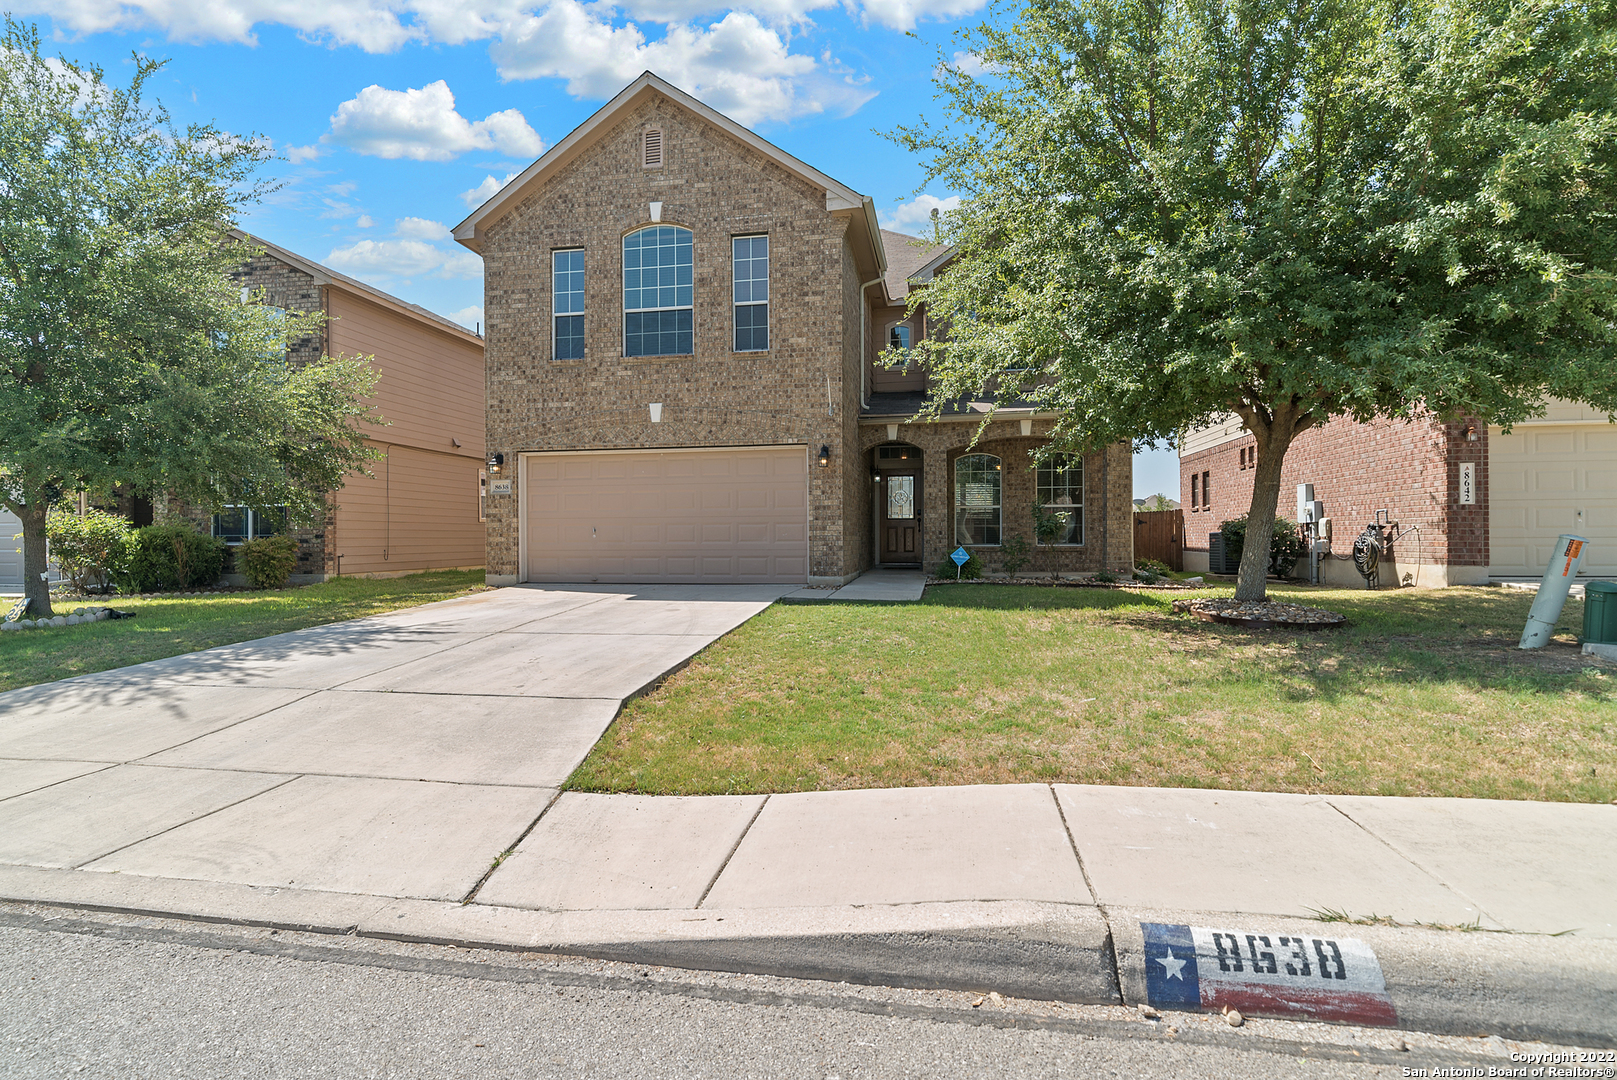 Just updated, two-story residence will impress from the moment you enter! Easy to clean vinyl floors, an open concept and an abundance of natural light. Conveniently located with easy access to Lackland AFB, Loop 410, Hwy 151 and Loop 1604. This large 4 bedroom, 2 1/2 bath is complete with a large family room, dining room and game room. The spacious kitchen includes an island with New Granite countertops, New Polished Tile Backsplash and stainless steel appliances. Large flat backyard for the kids to play in and a covered patio for outside entertaining. Upgrades include New Vinyl Plank floors downstairs, Brand New Carpert and Pad upstairs with fresh interior paint. No FHA offers because of 90 Day Flip Rule.